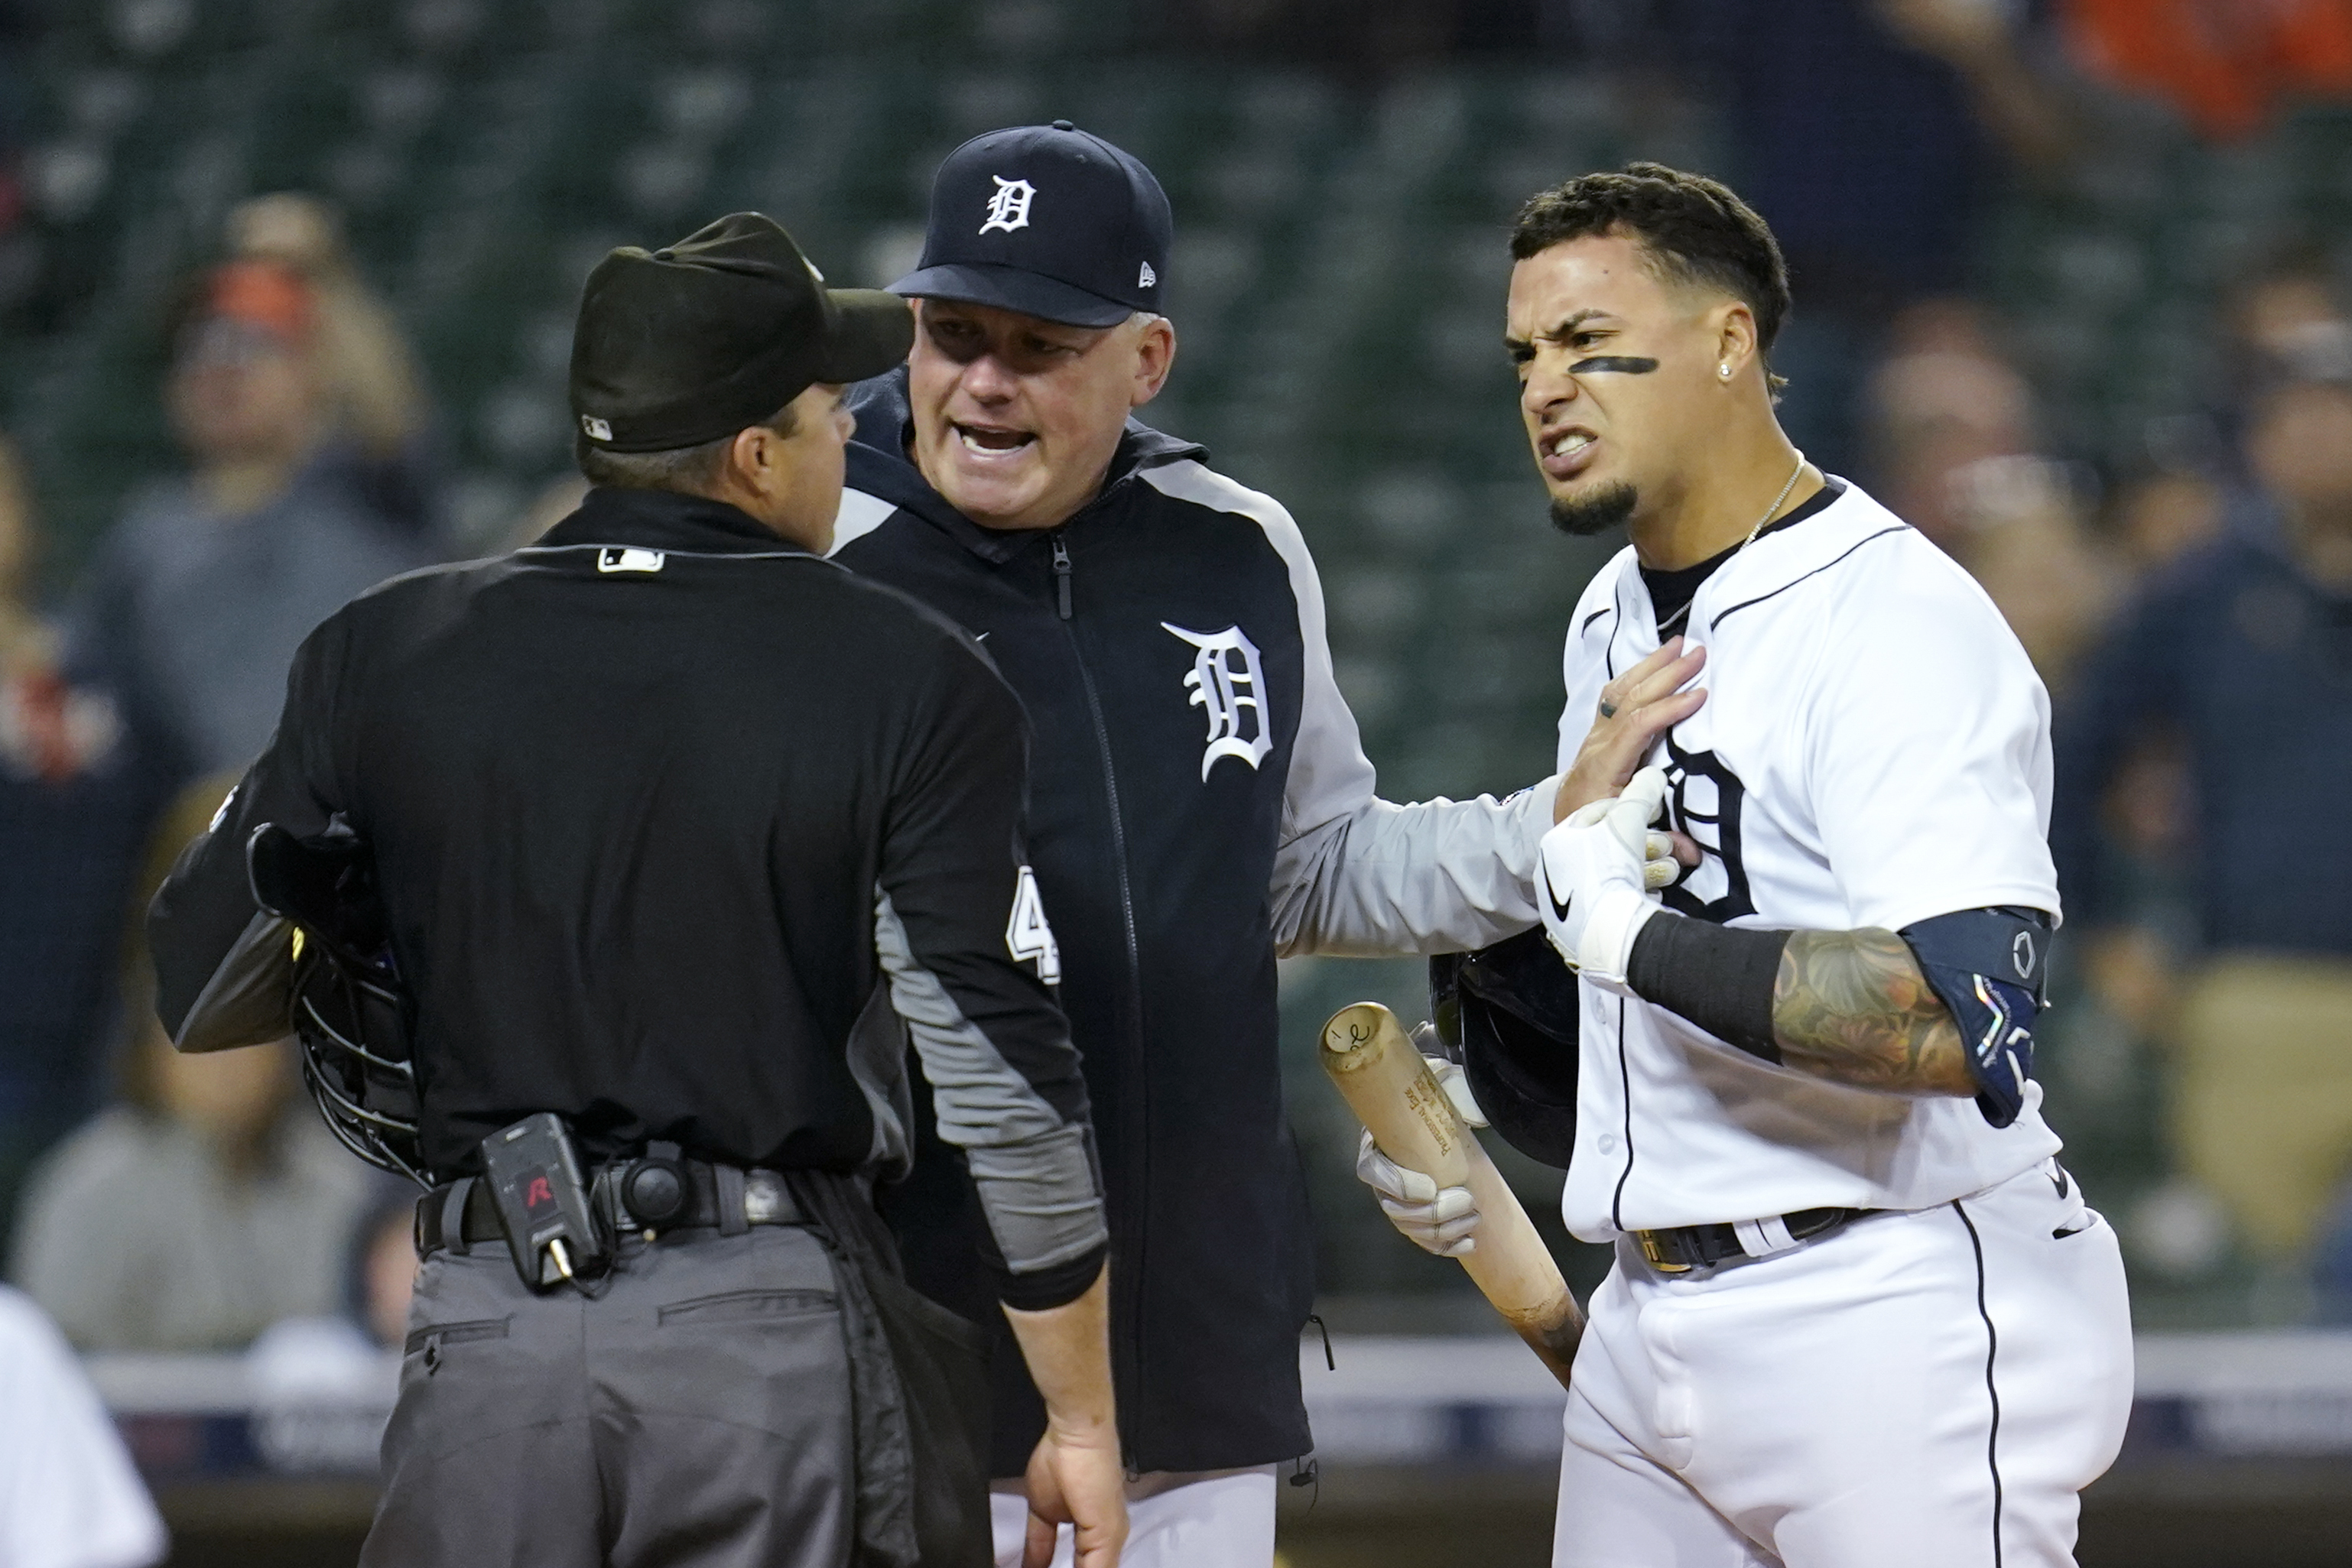 Detroit Tigers: 4 positives that came from the 2022 season